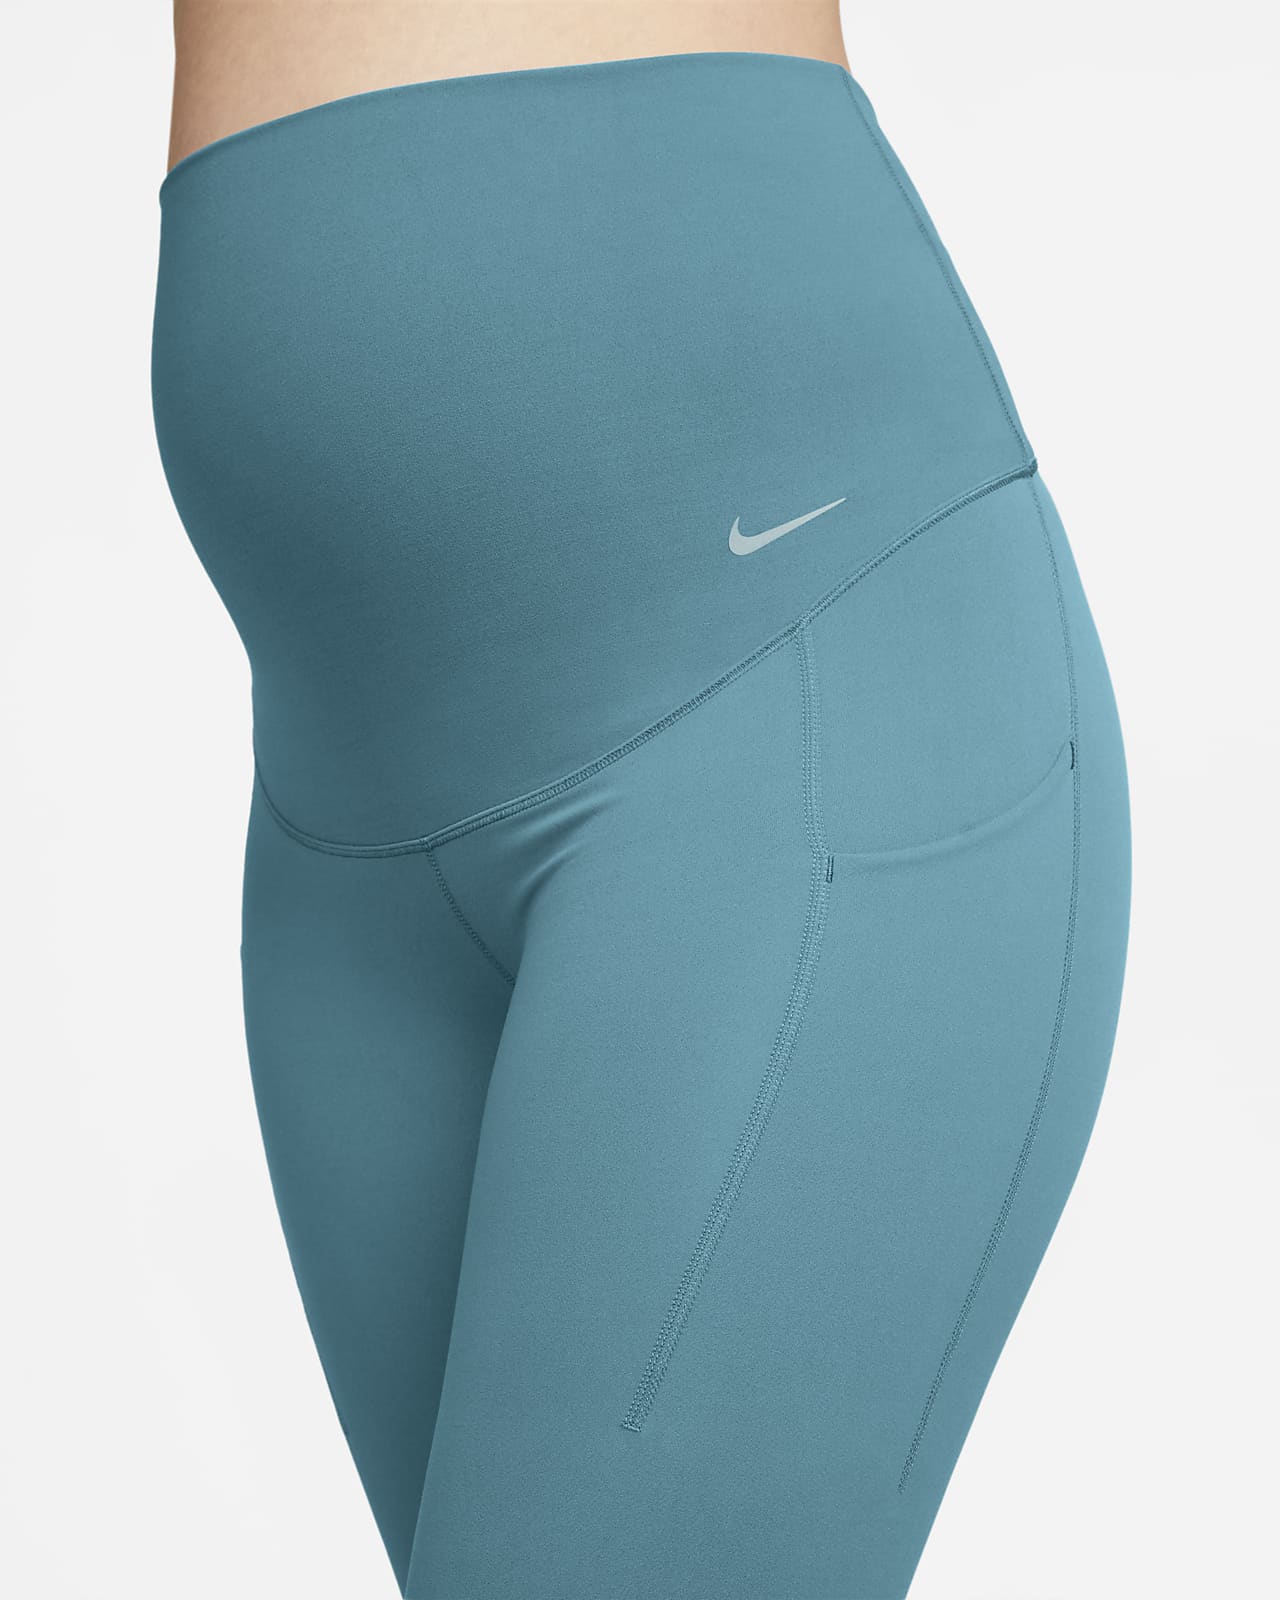 Maternity One High-Waisted Leggings by Nike Online